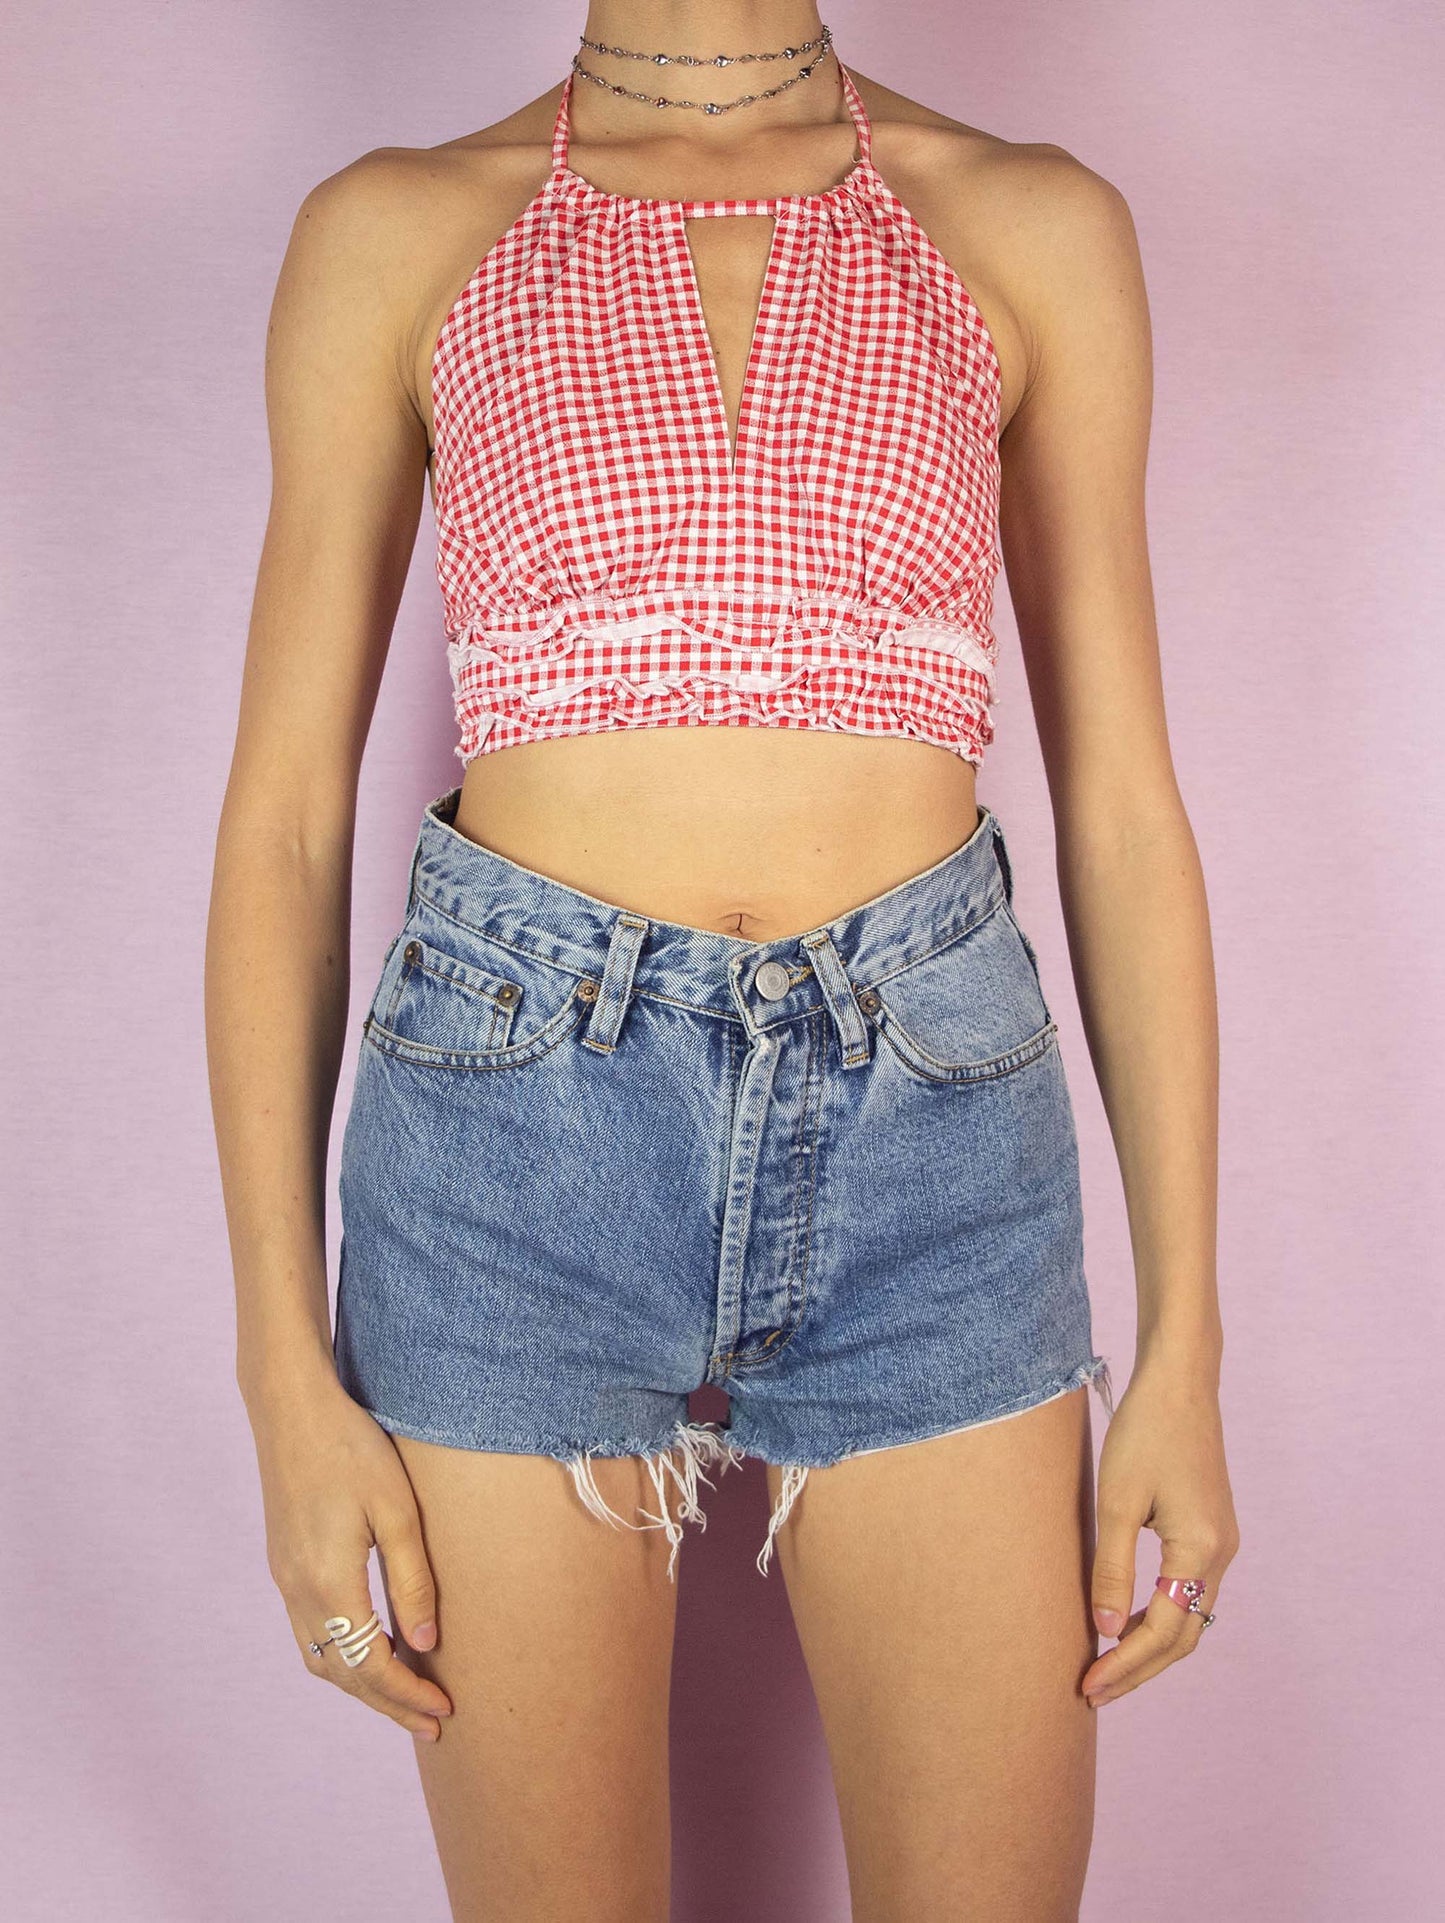 The Y2K Red Check Halter Crop Top is a vintage 2000s red and white gingham plaid elastic top perfect for summer beach days, which ties around the neck and back.